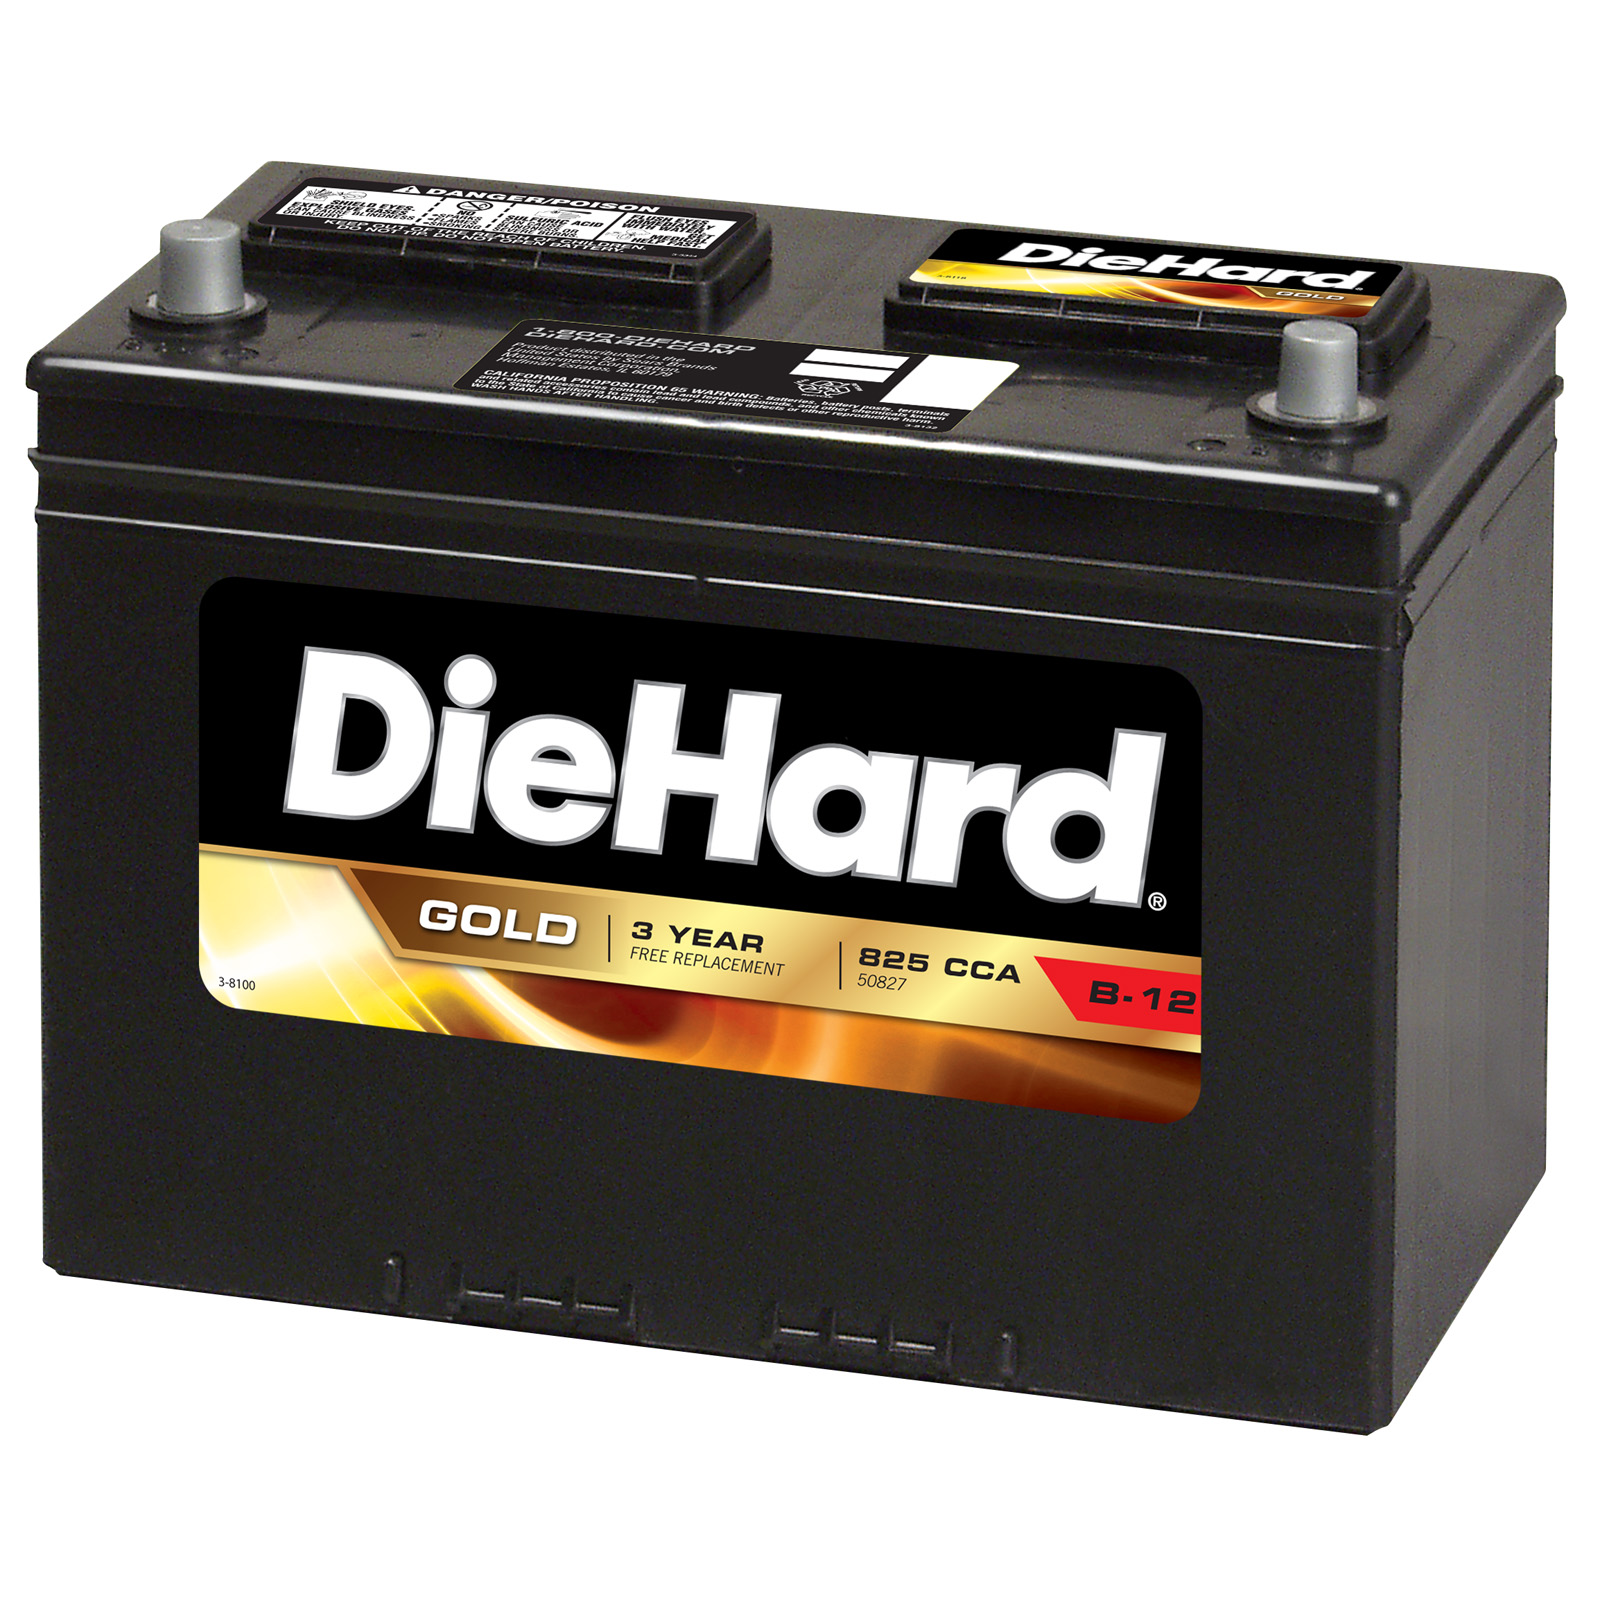 DieHard Gold Automotive Battery - Group Size EP-27 (Price with Exchange)